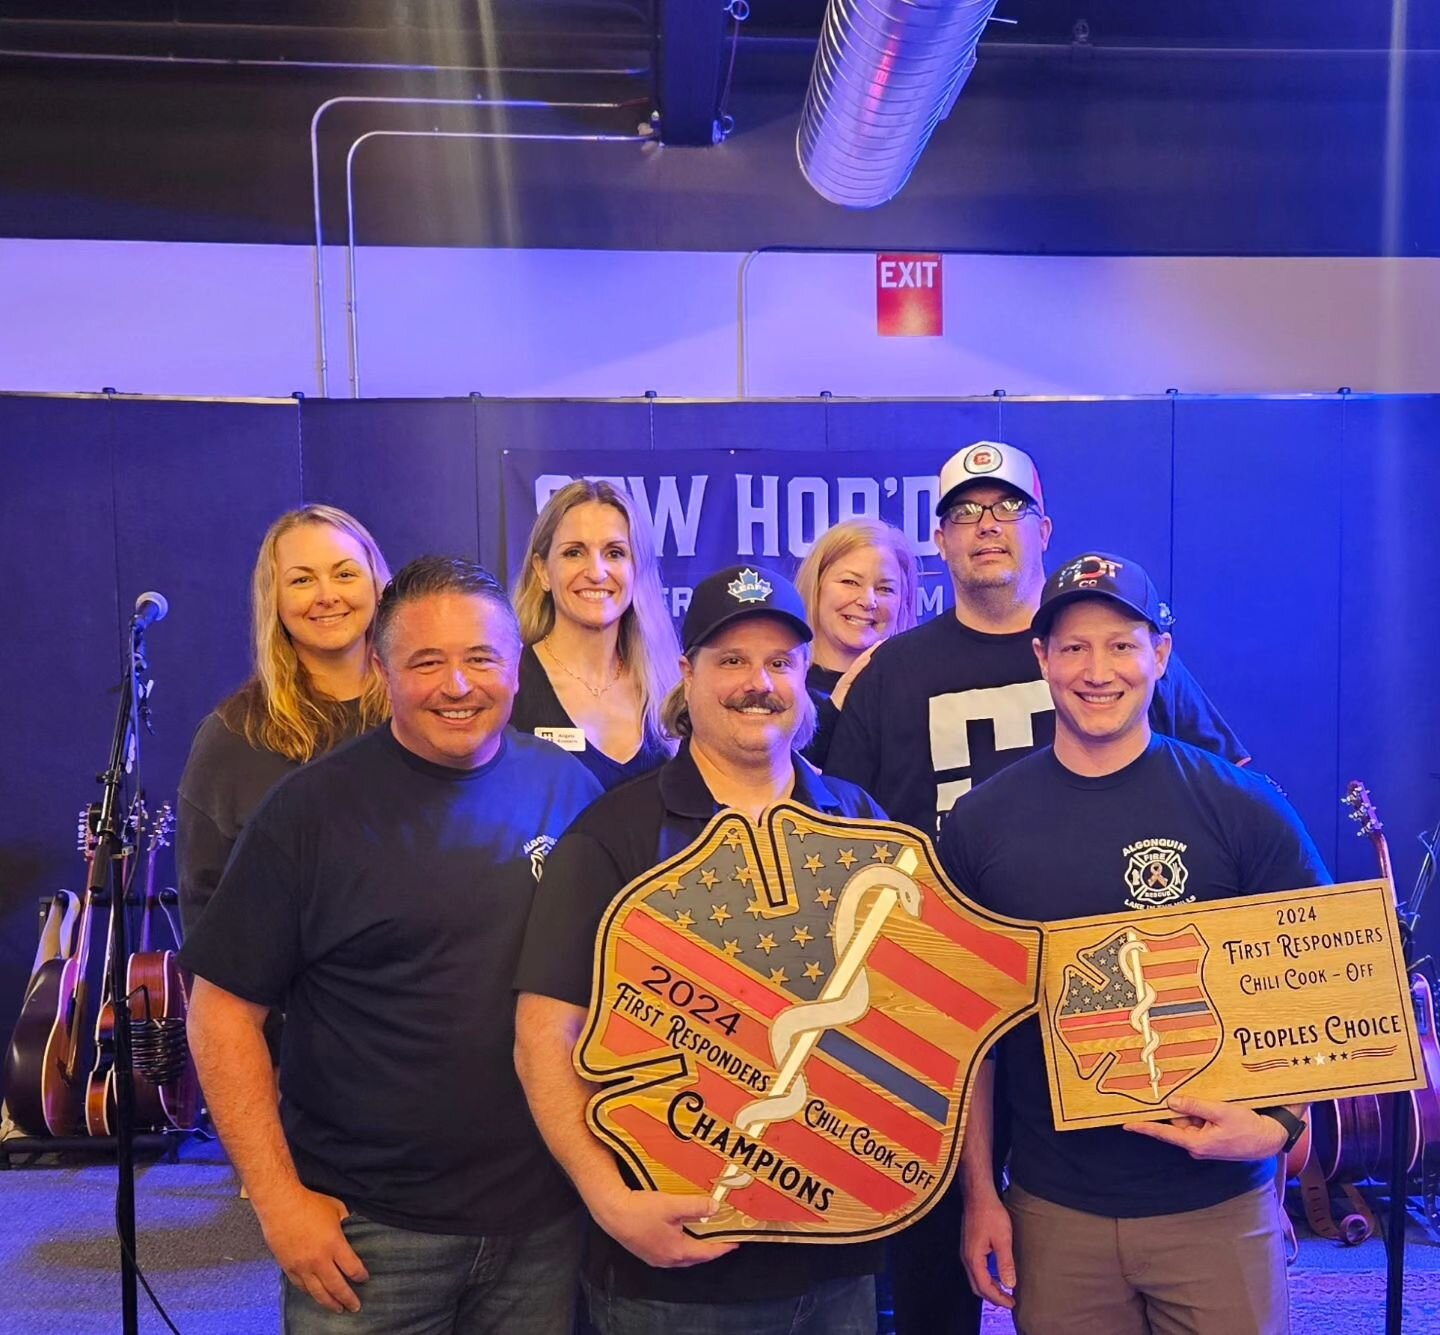 Thanks to everyone who made it out for the 2nd Annual Chili Cook-Off today! HUGE shout out to @vetransq for putting together such a great event. Congratulations to the winners! ⬇️ 

First Responders Contest:
Algonquin/LITH Fire Department 

Open Cont